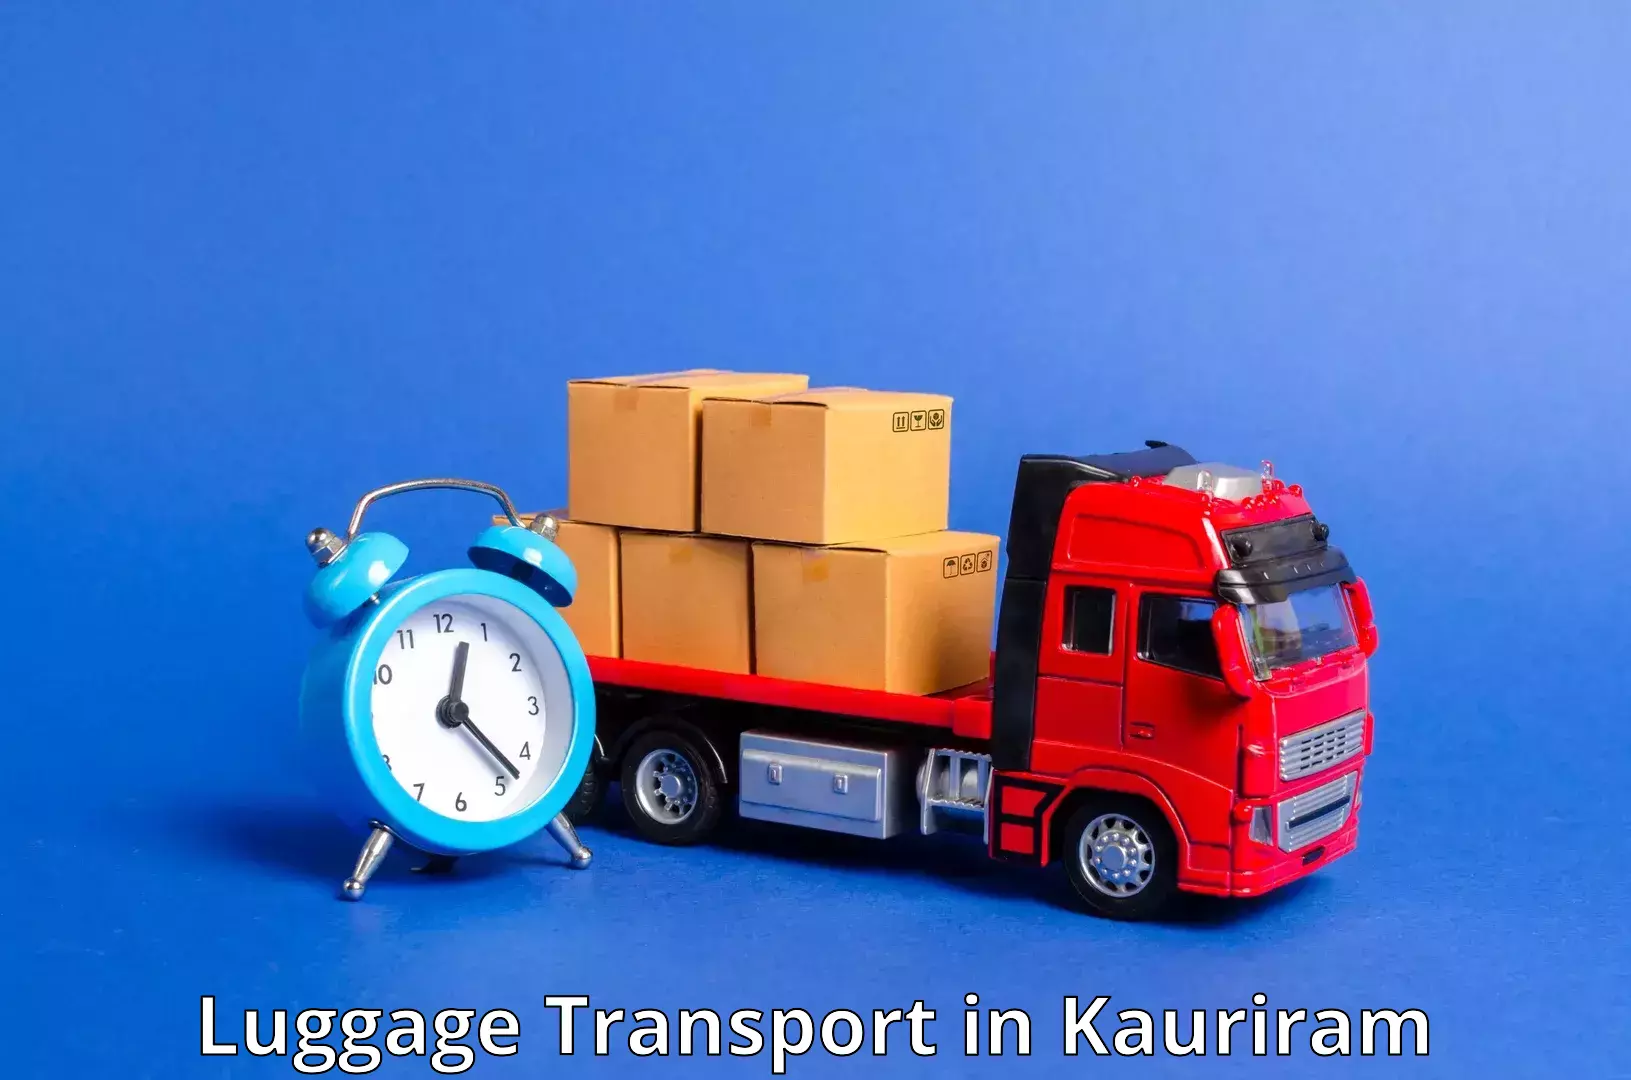 Luggage shipping solutions in Kauriram